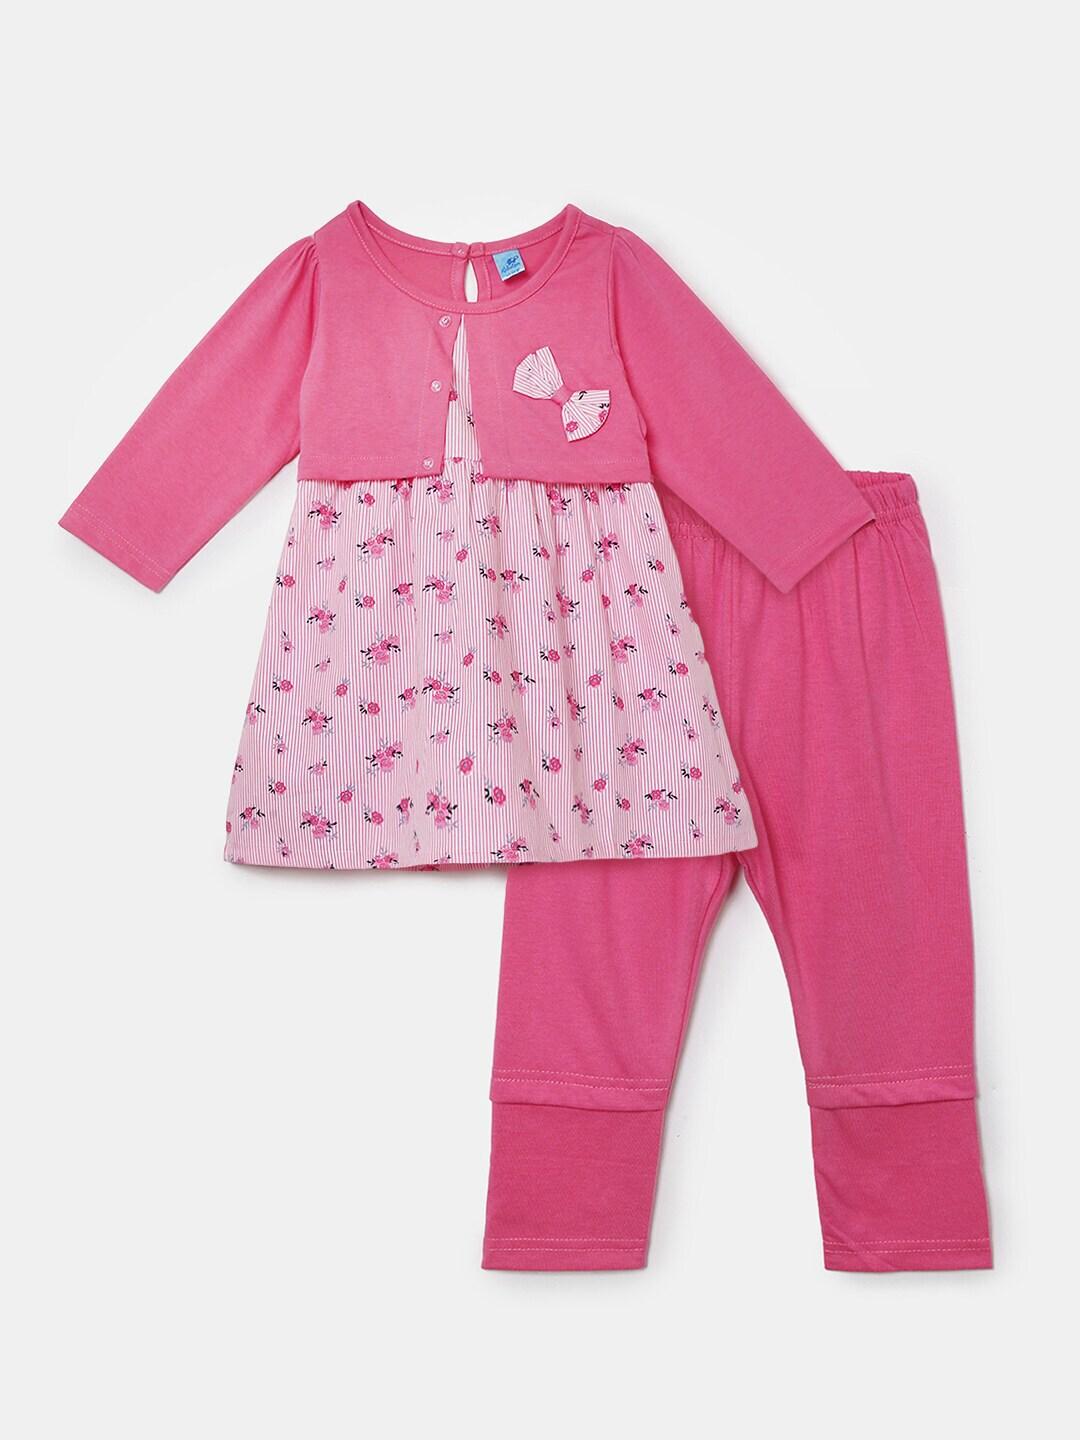 v-mart kids pink & white printed pure cotton top with pyjamas